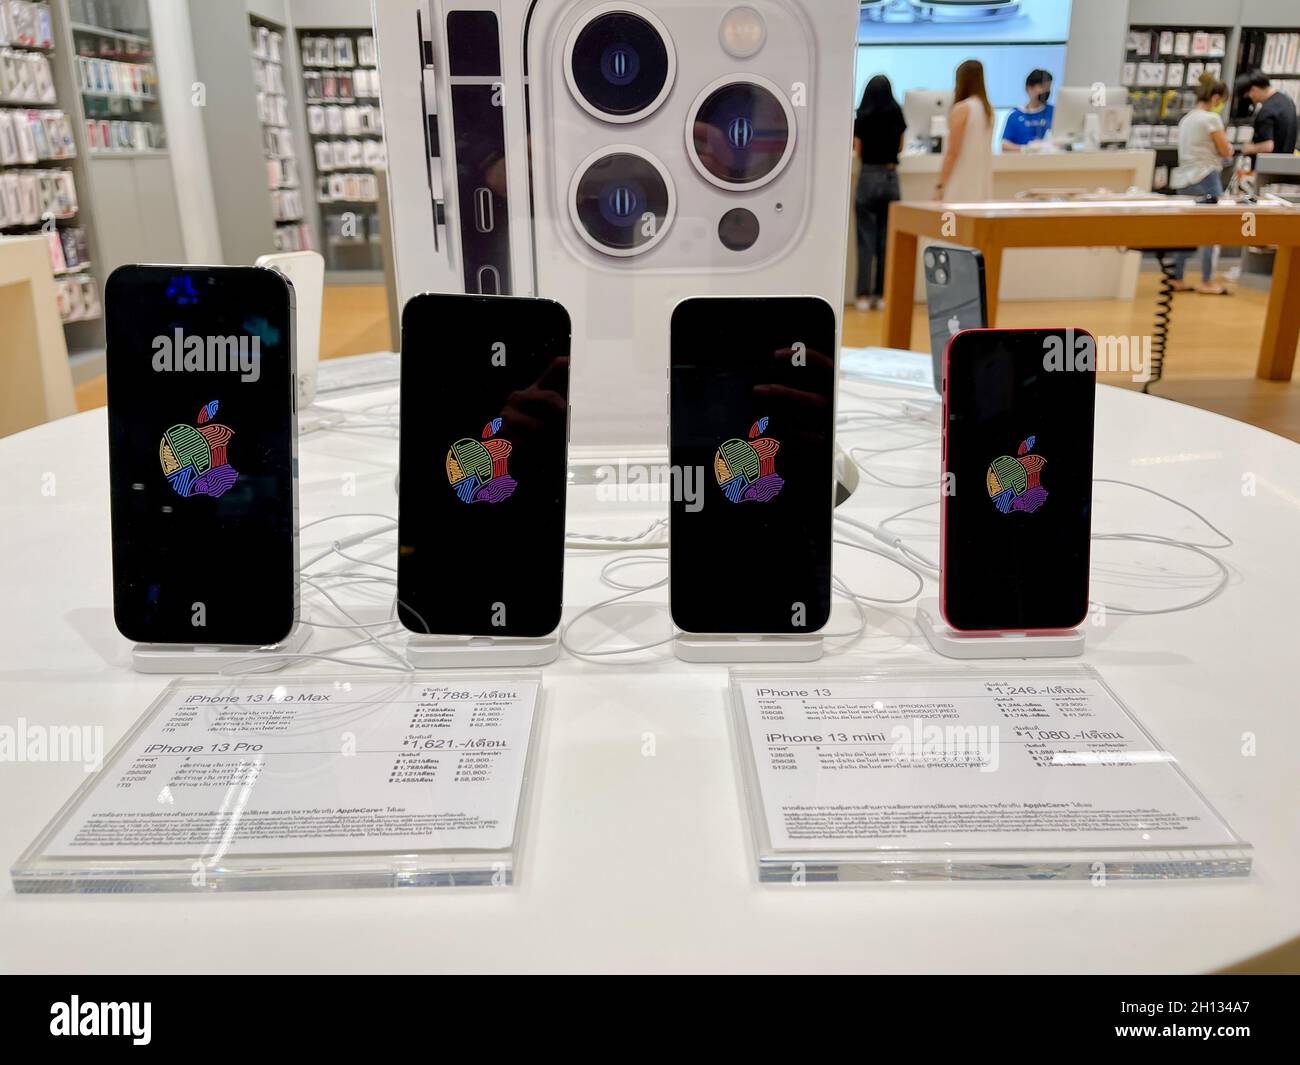 Bangkok, Thailand - October 13, 2021: iPhone 13 series are shown to sell in iStudio By Comseven - EMQUARTIER DEPARTMENTSTORE in Bangkok, Thailand Stock Photo